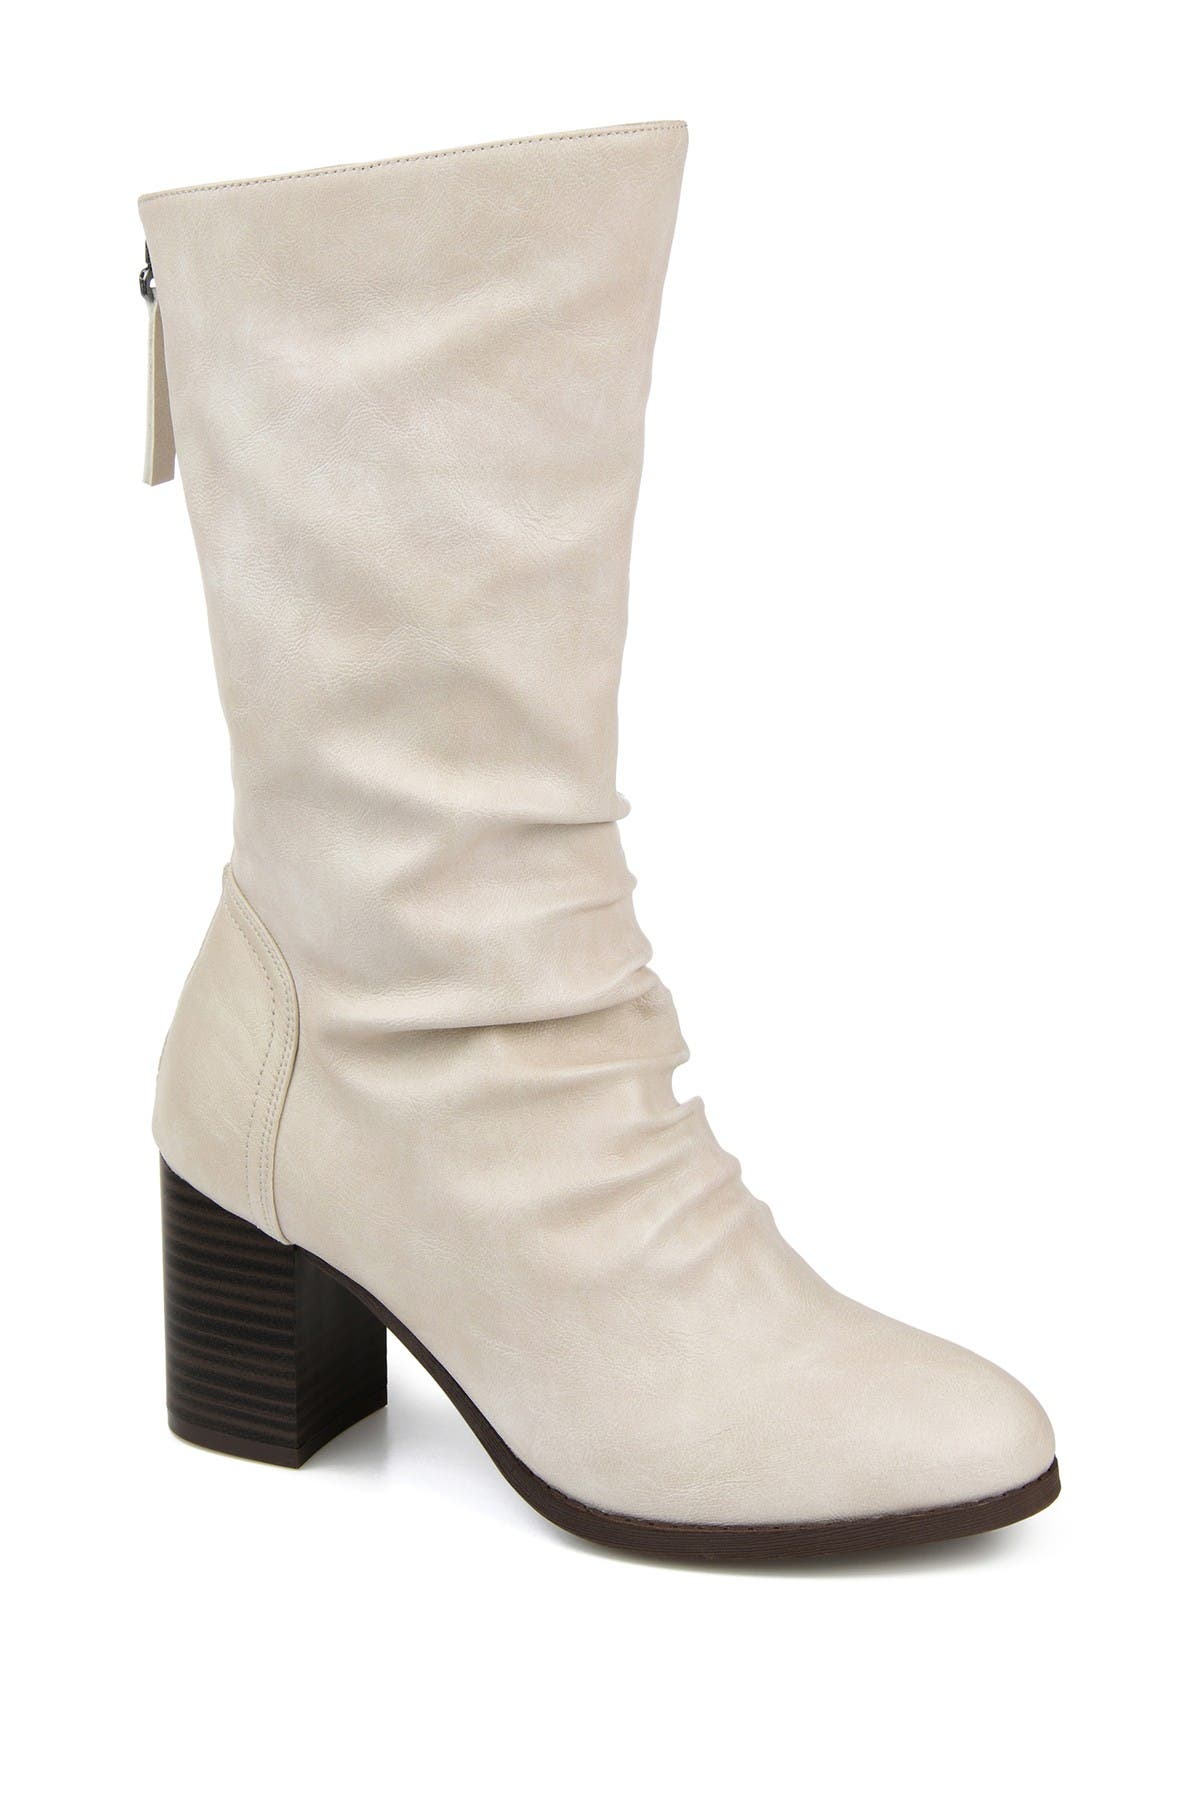 journee slouch boots